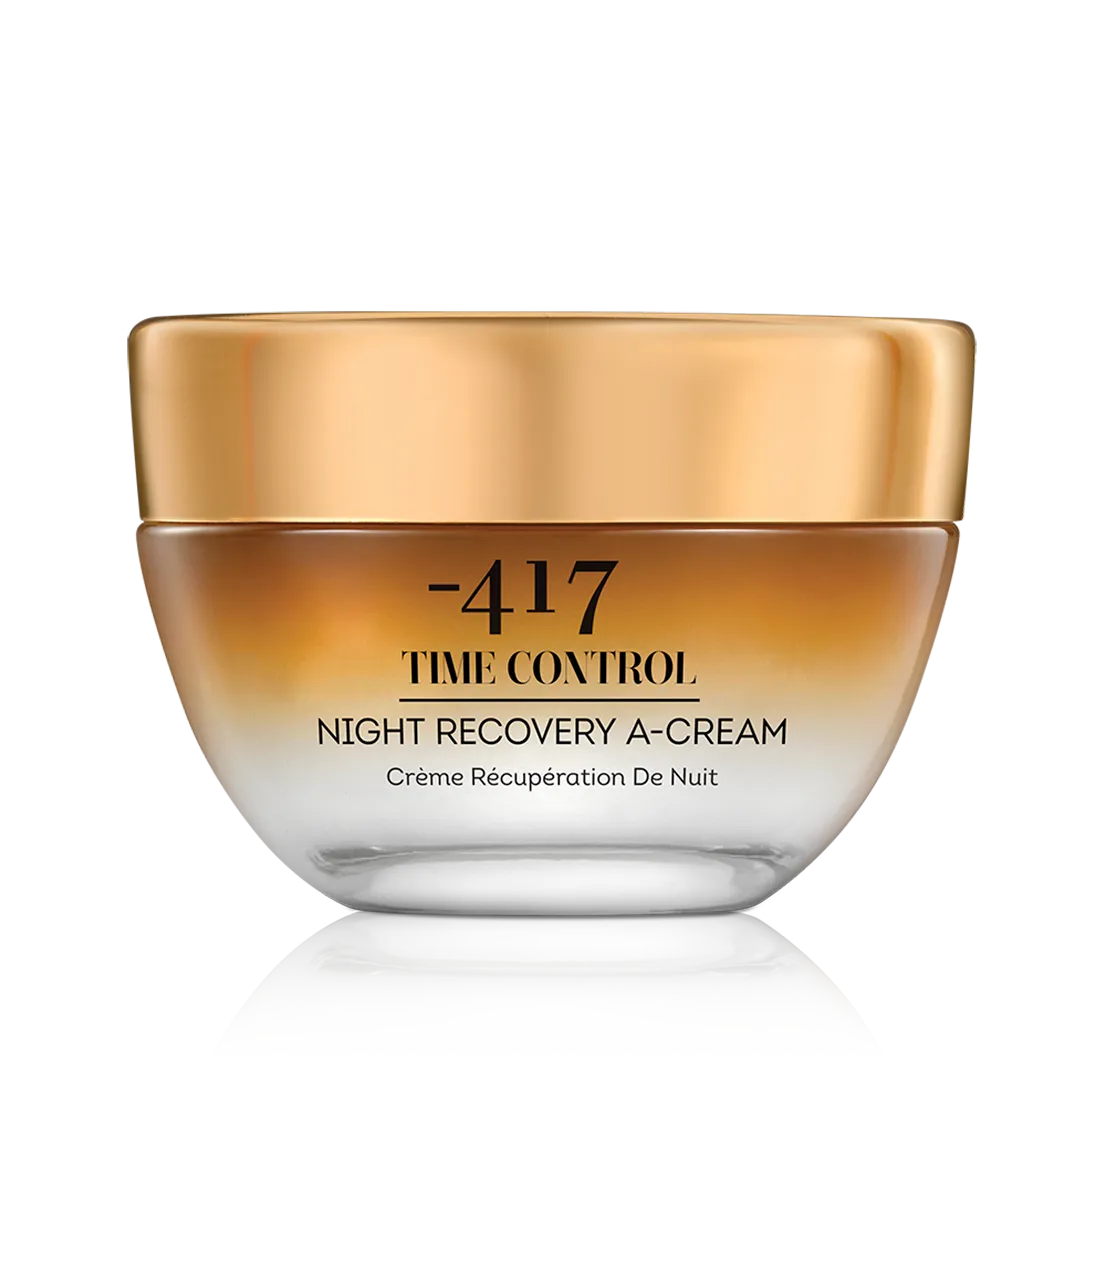 -417 Dead Sea Time Control Night Recovery Cream & Face Moisturizer, Wrinkle Recovery Anti-Aging